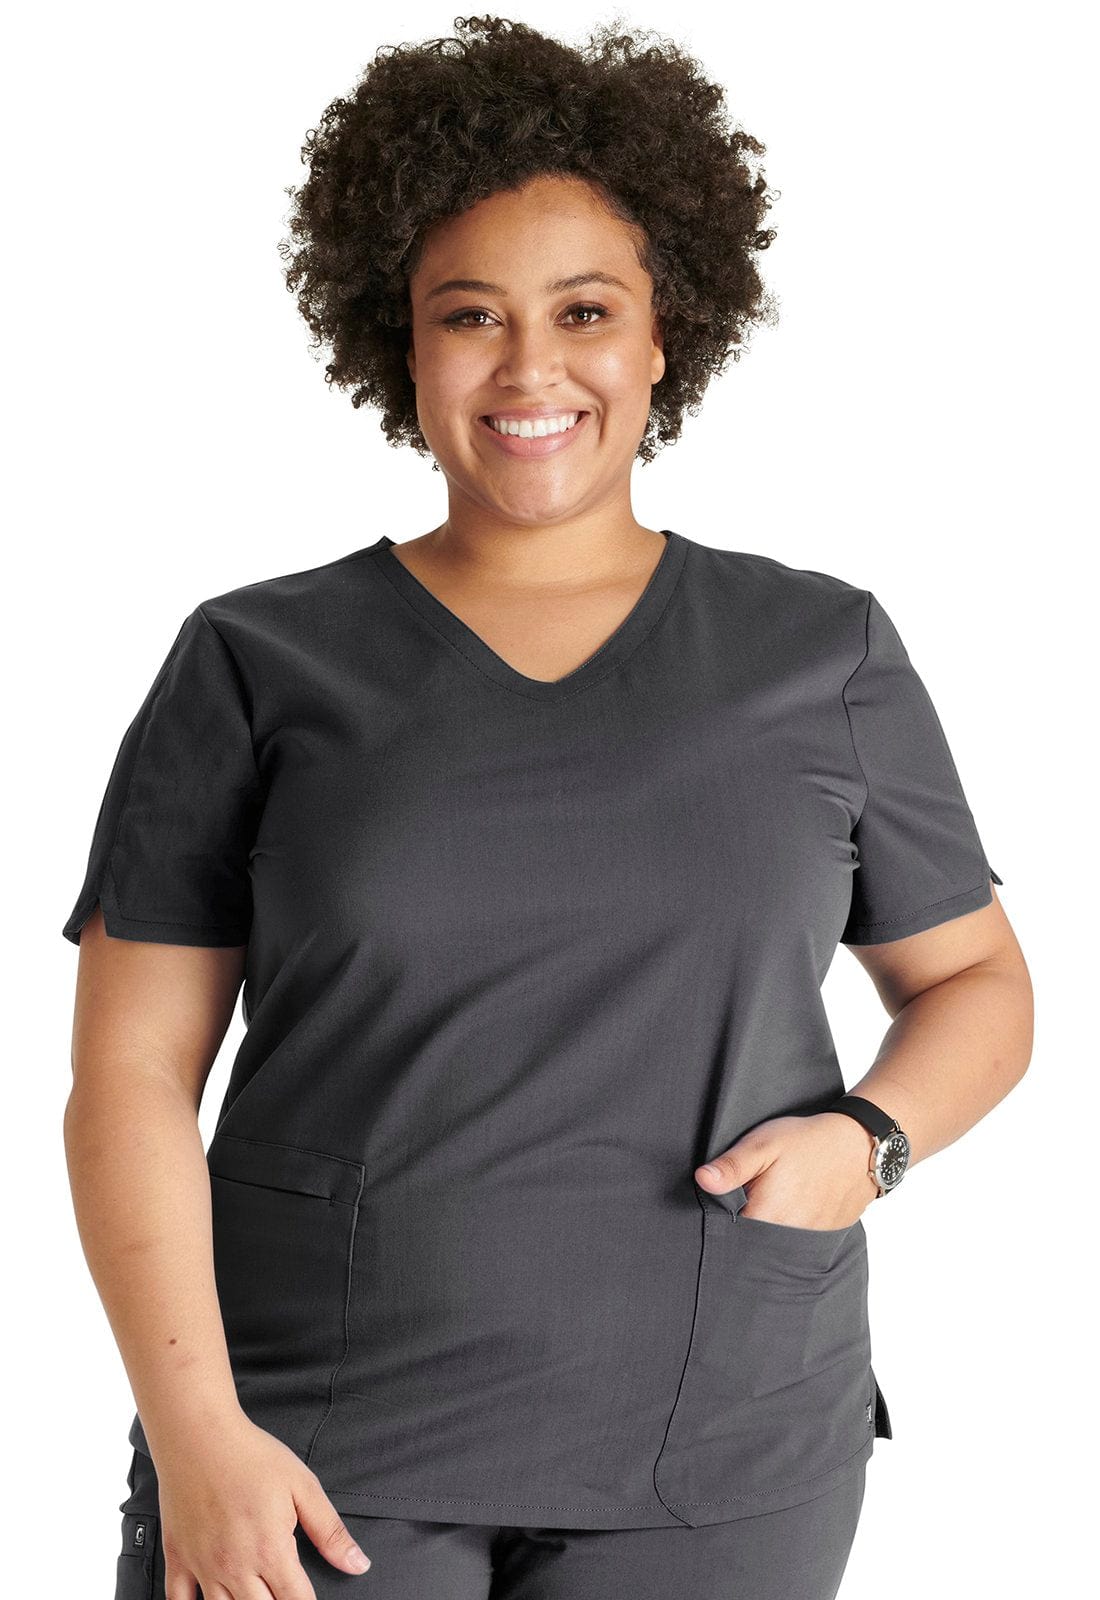 Clearance iflex by Cherokee Women's Let's Flock Together Print Scrub Top